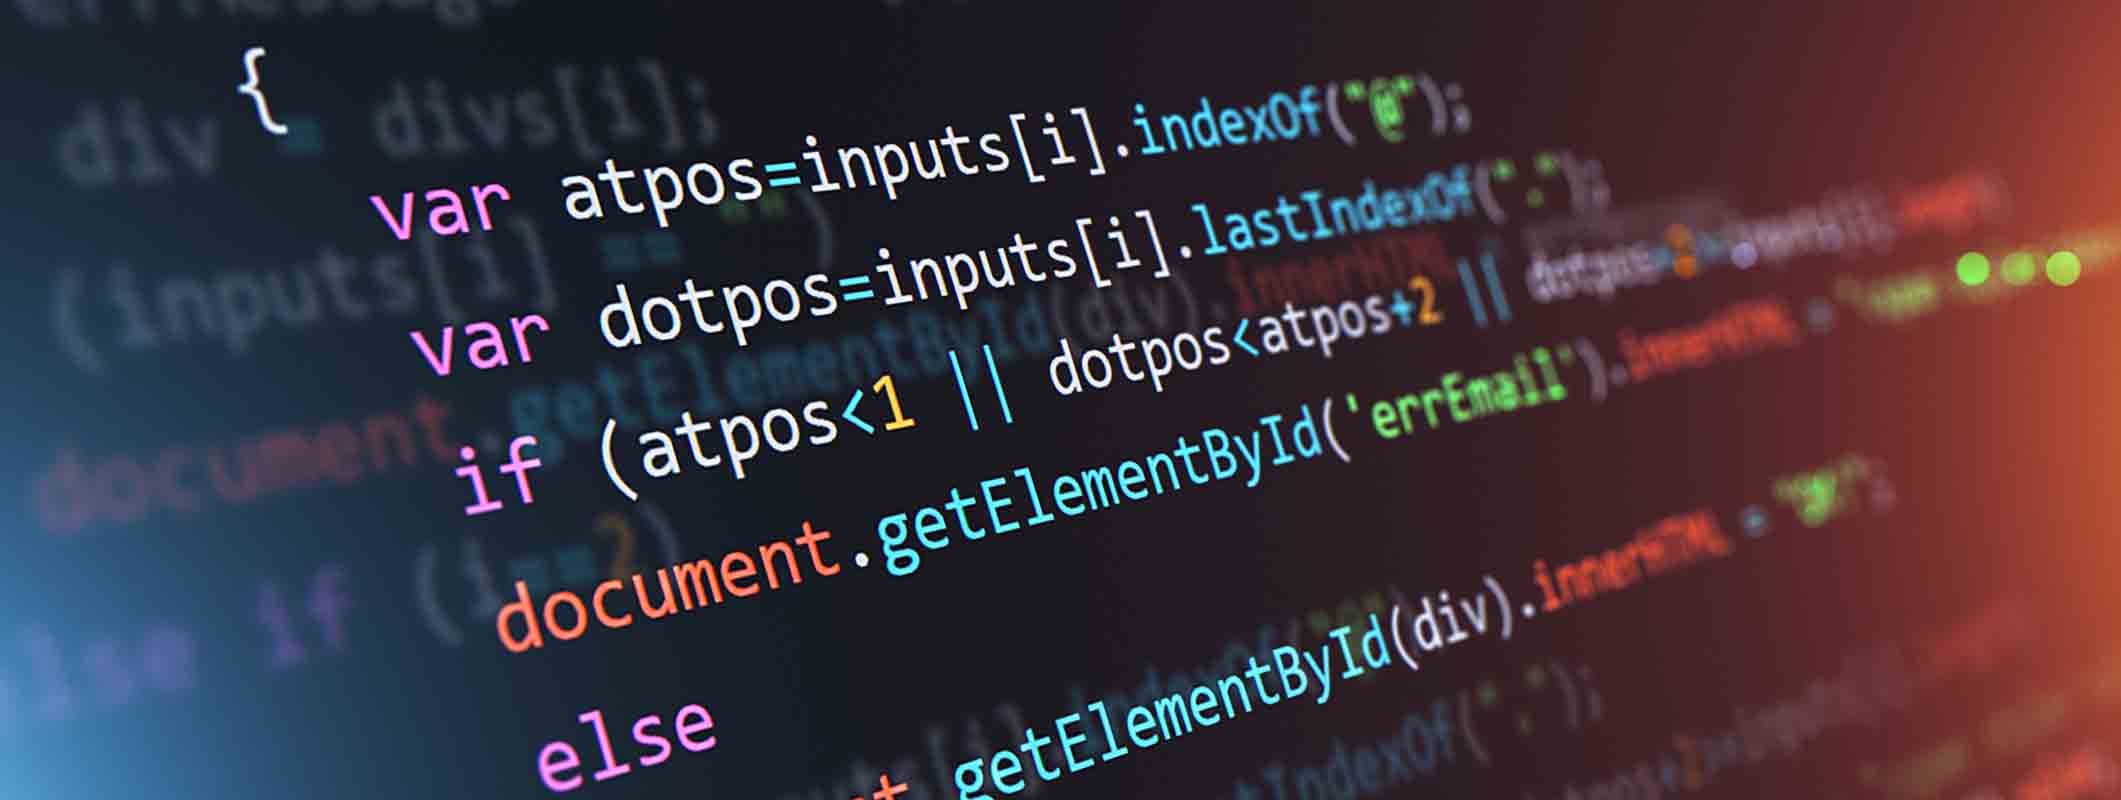 Programming source code abstract background